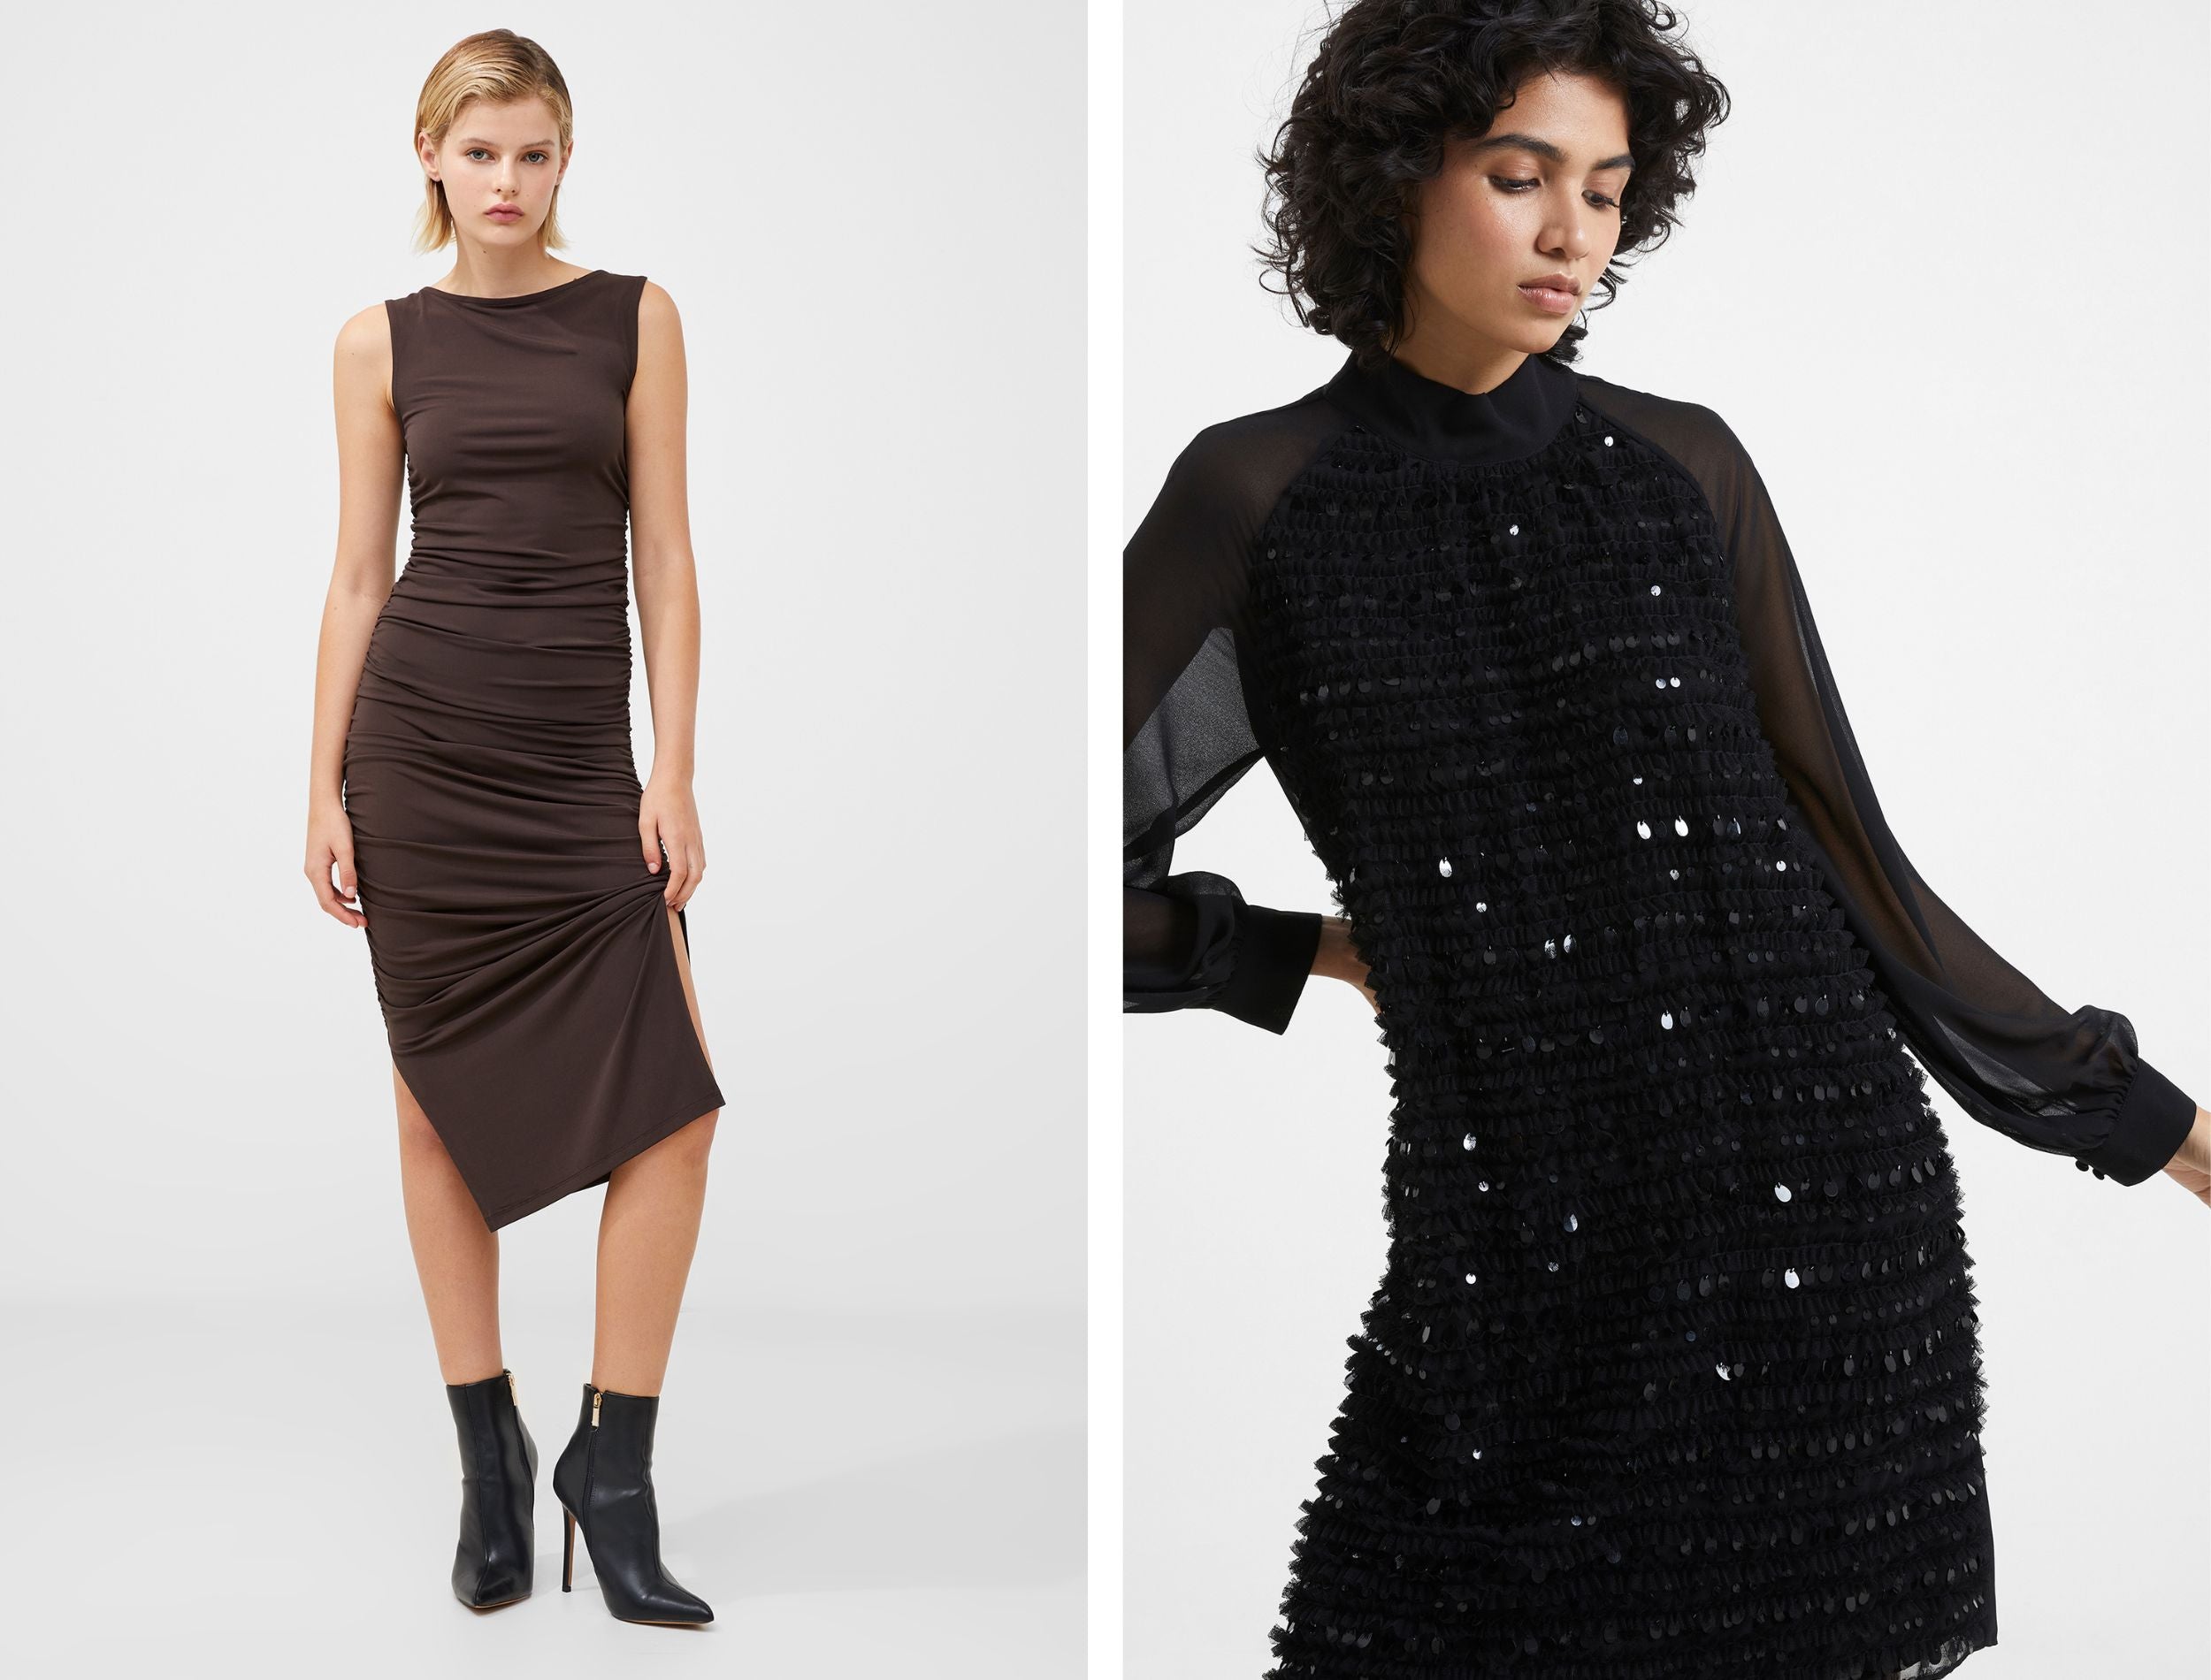 Party dresses for going out